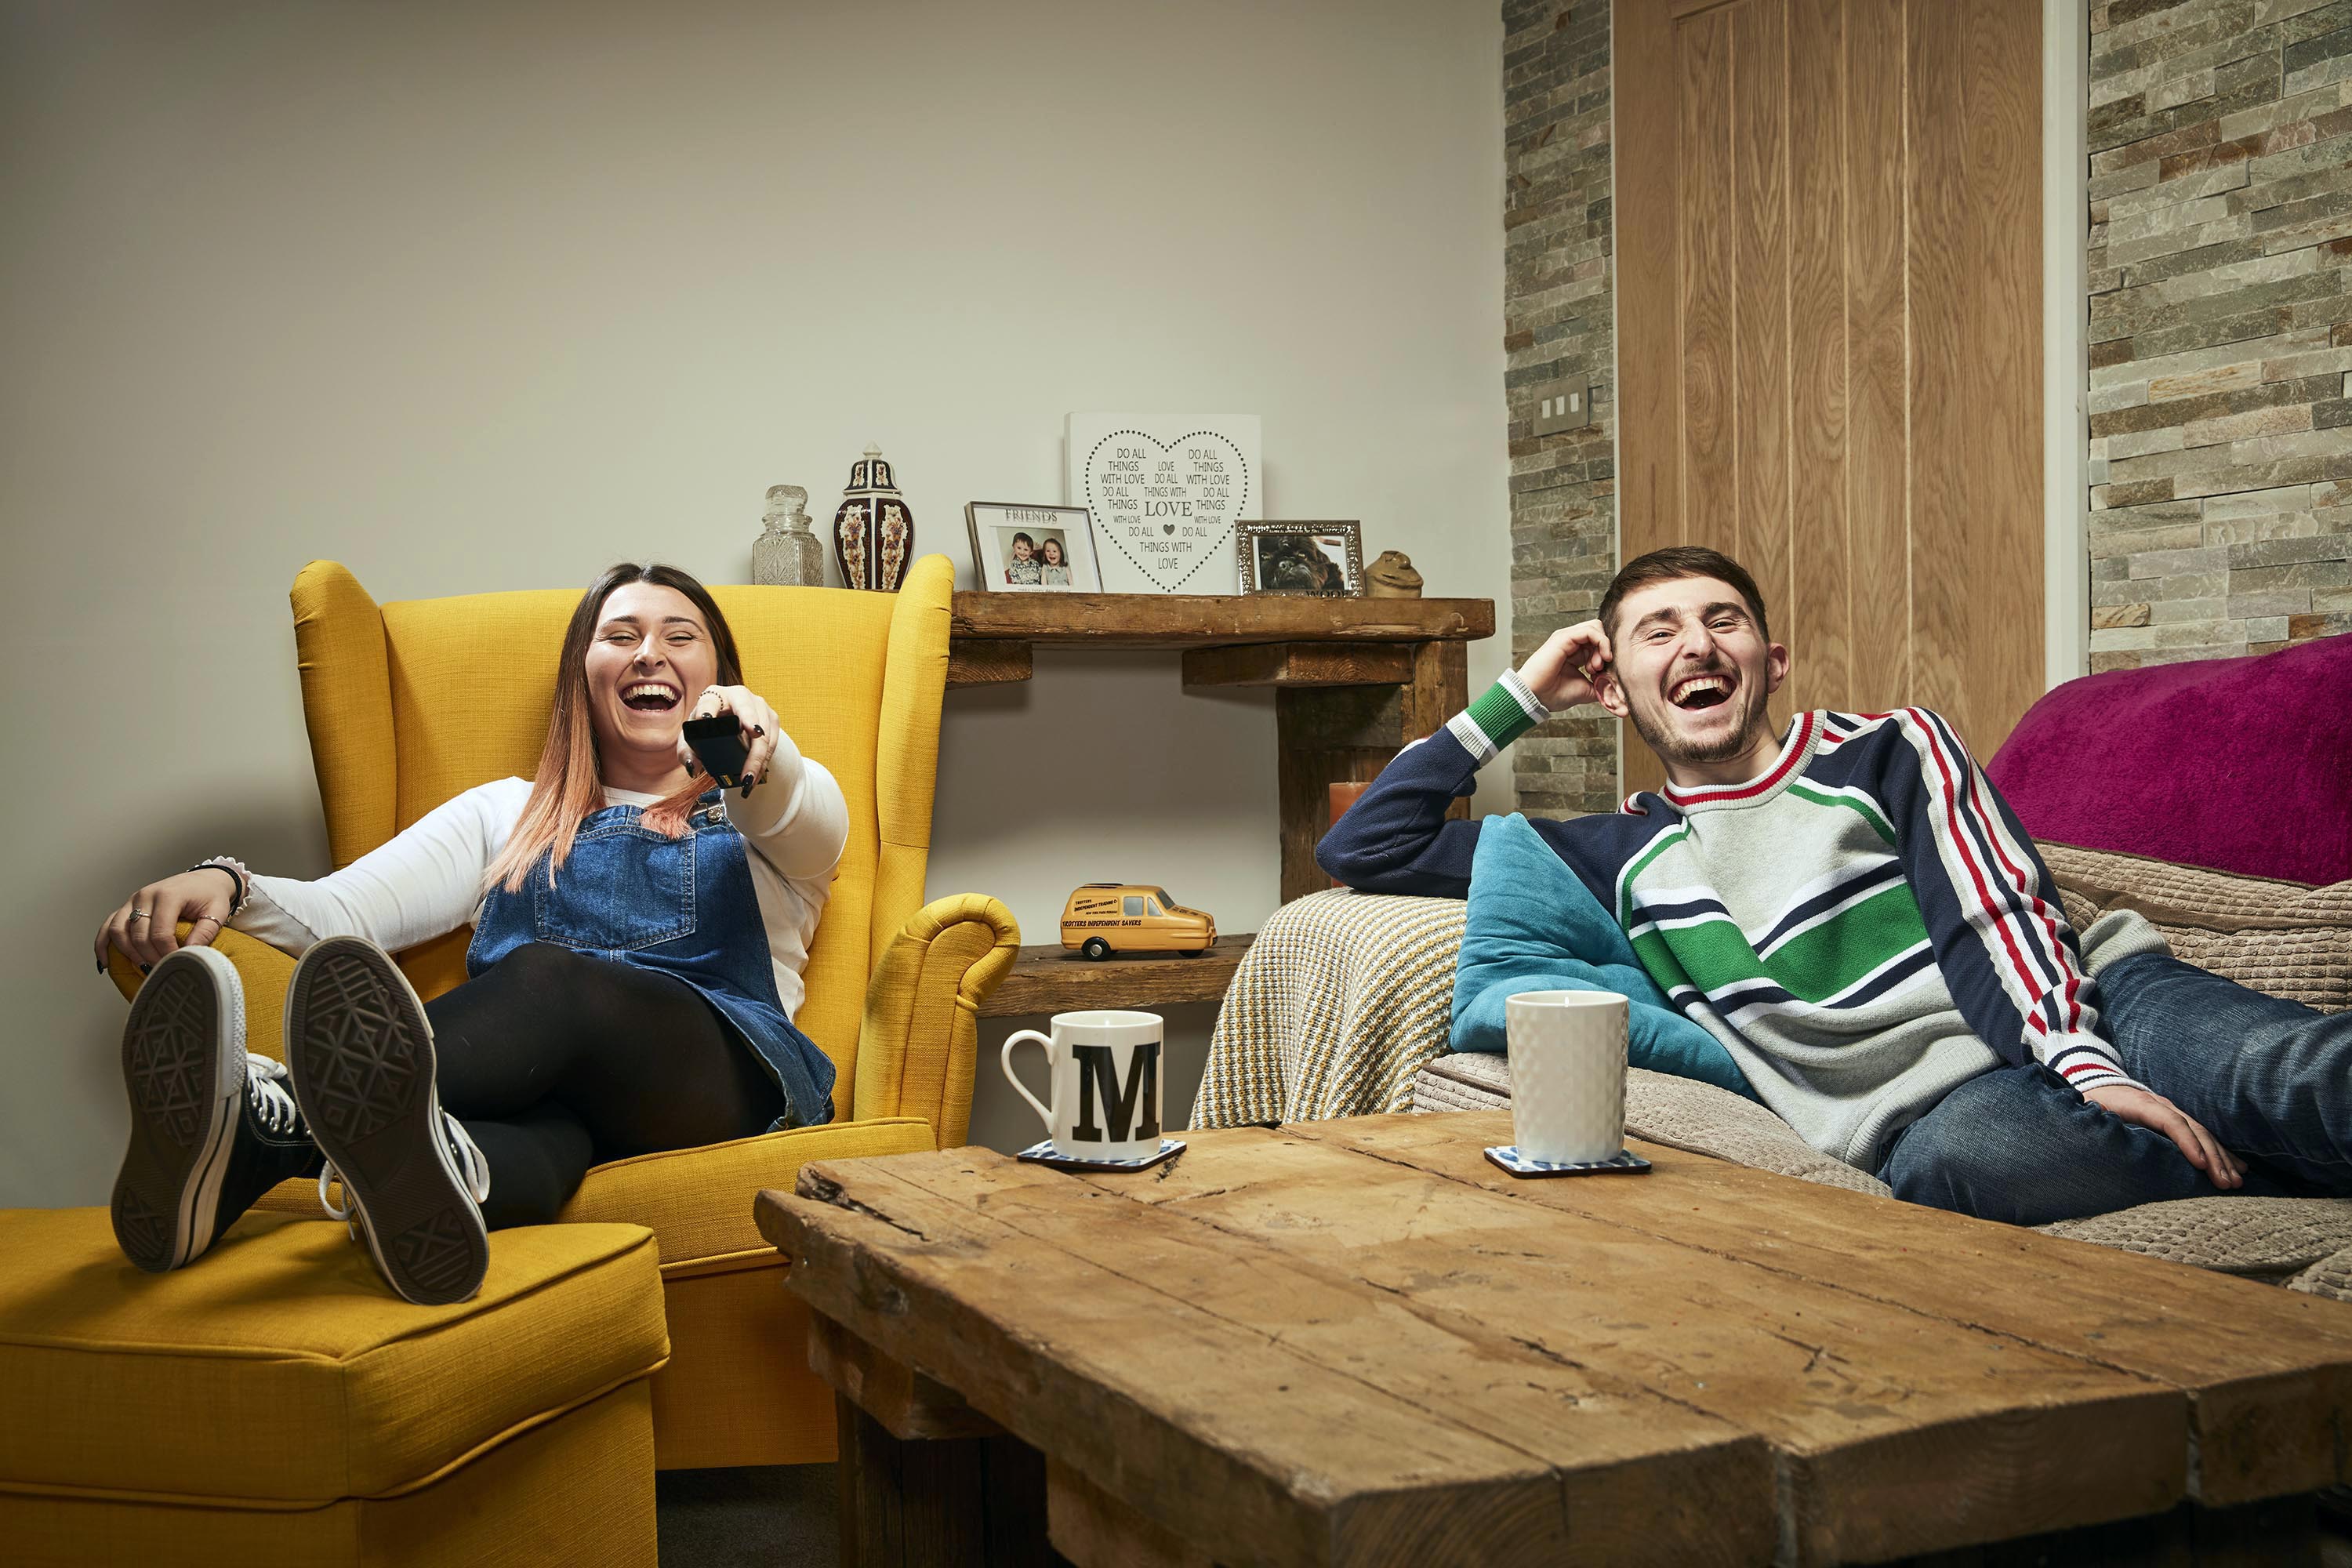 How to apply for Gogglebox - Channel 4 is looking for new cast members